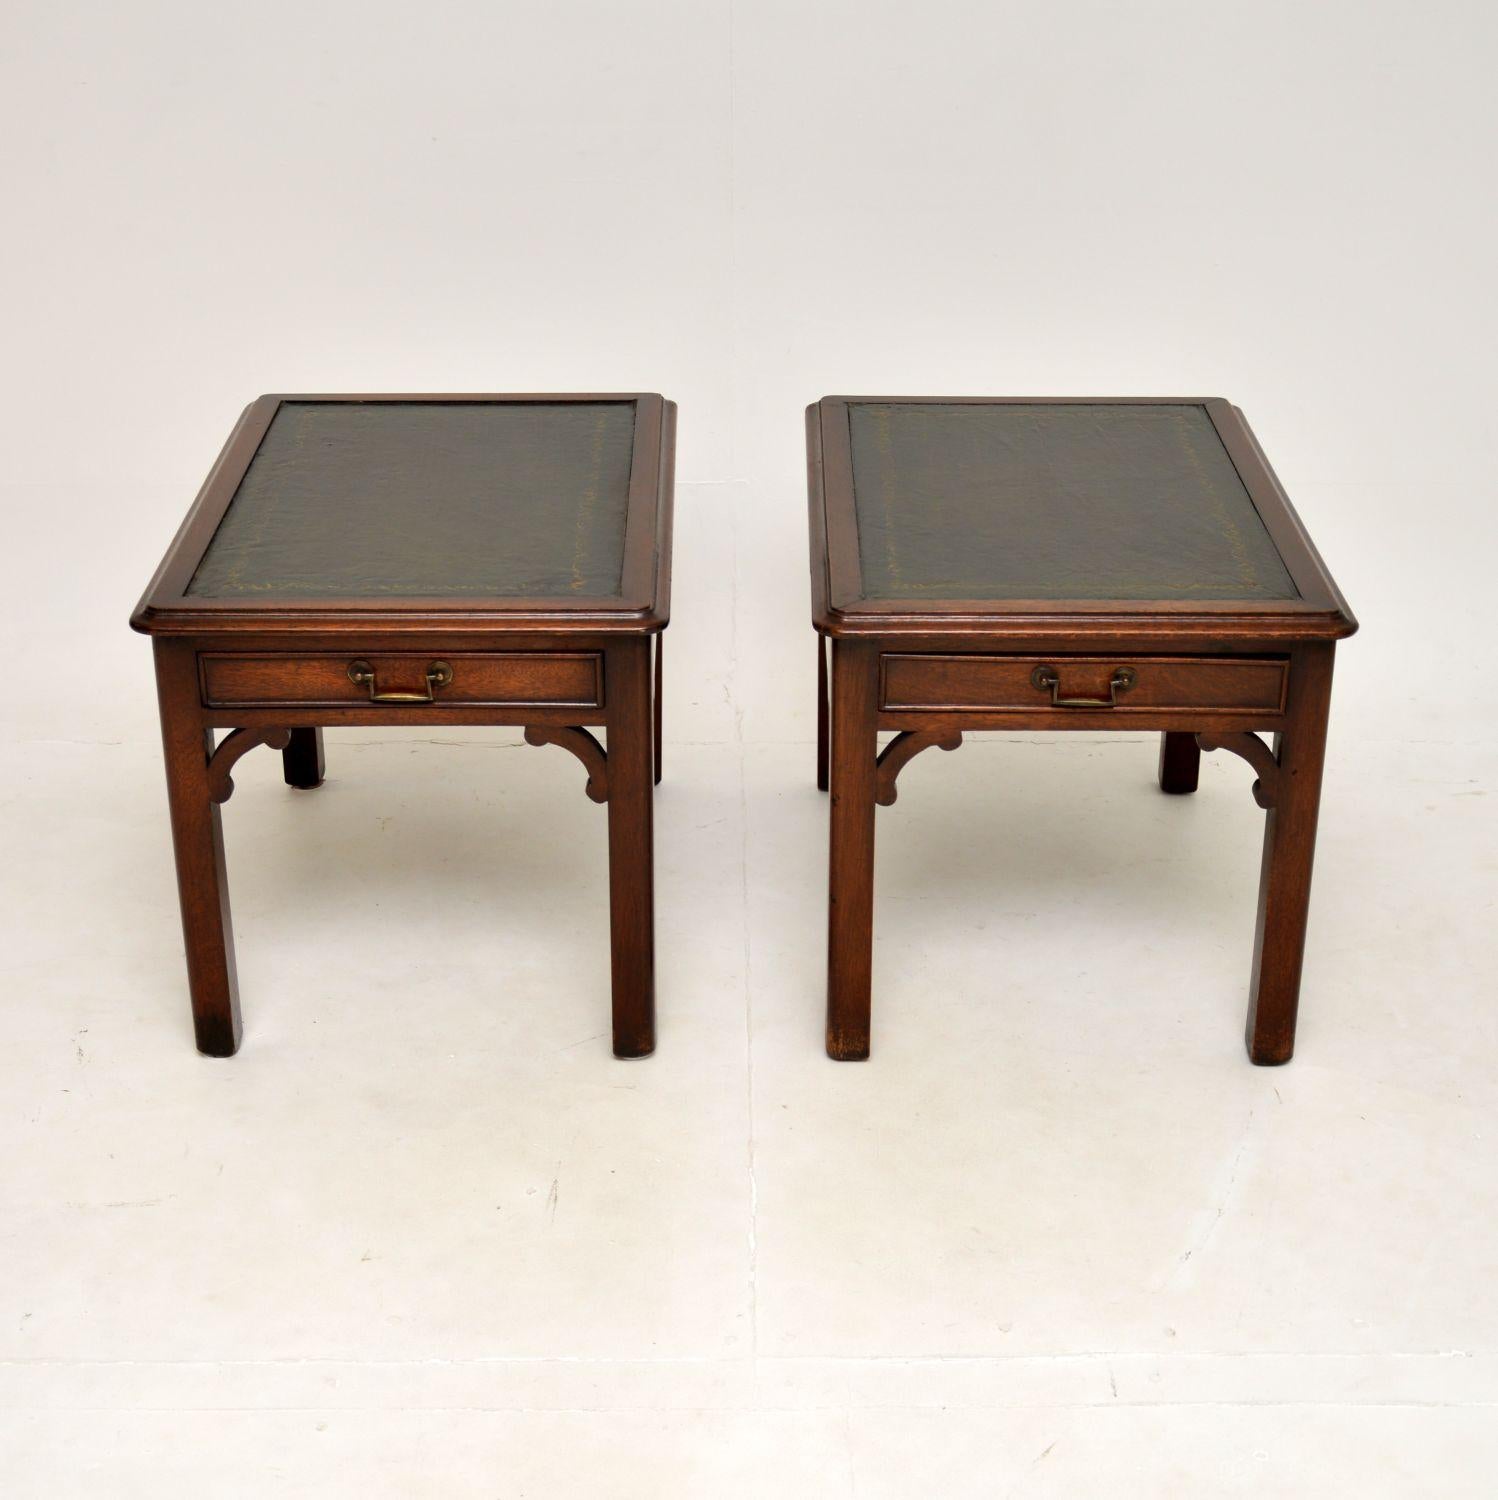 A smart and very well made pair of antique leather top side tables. They were made in England, they date from around the 1900-1910 period.

The quality is excellent, they are very nicely designed and are finished on all sides, so can be used as free